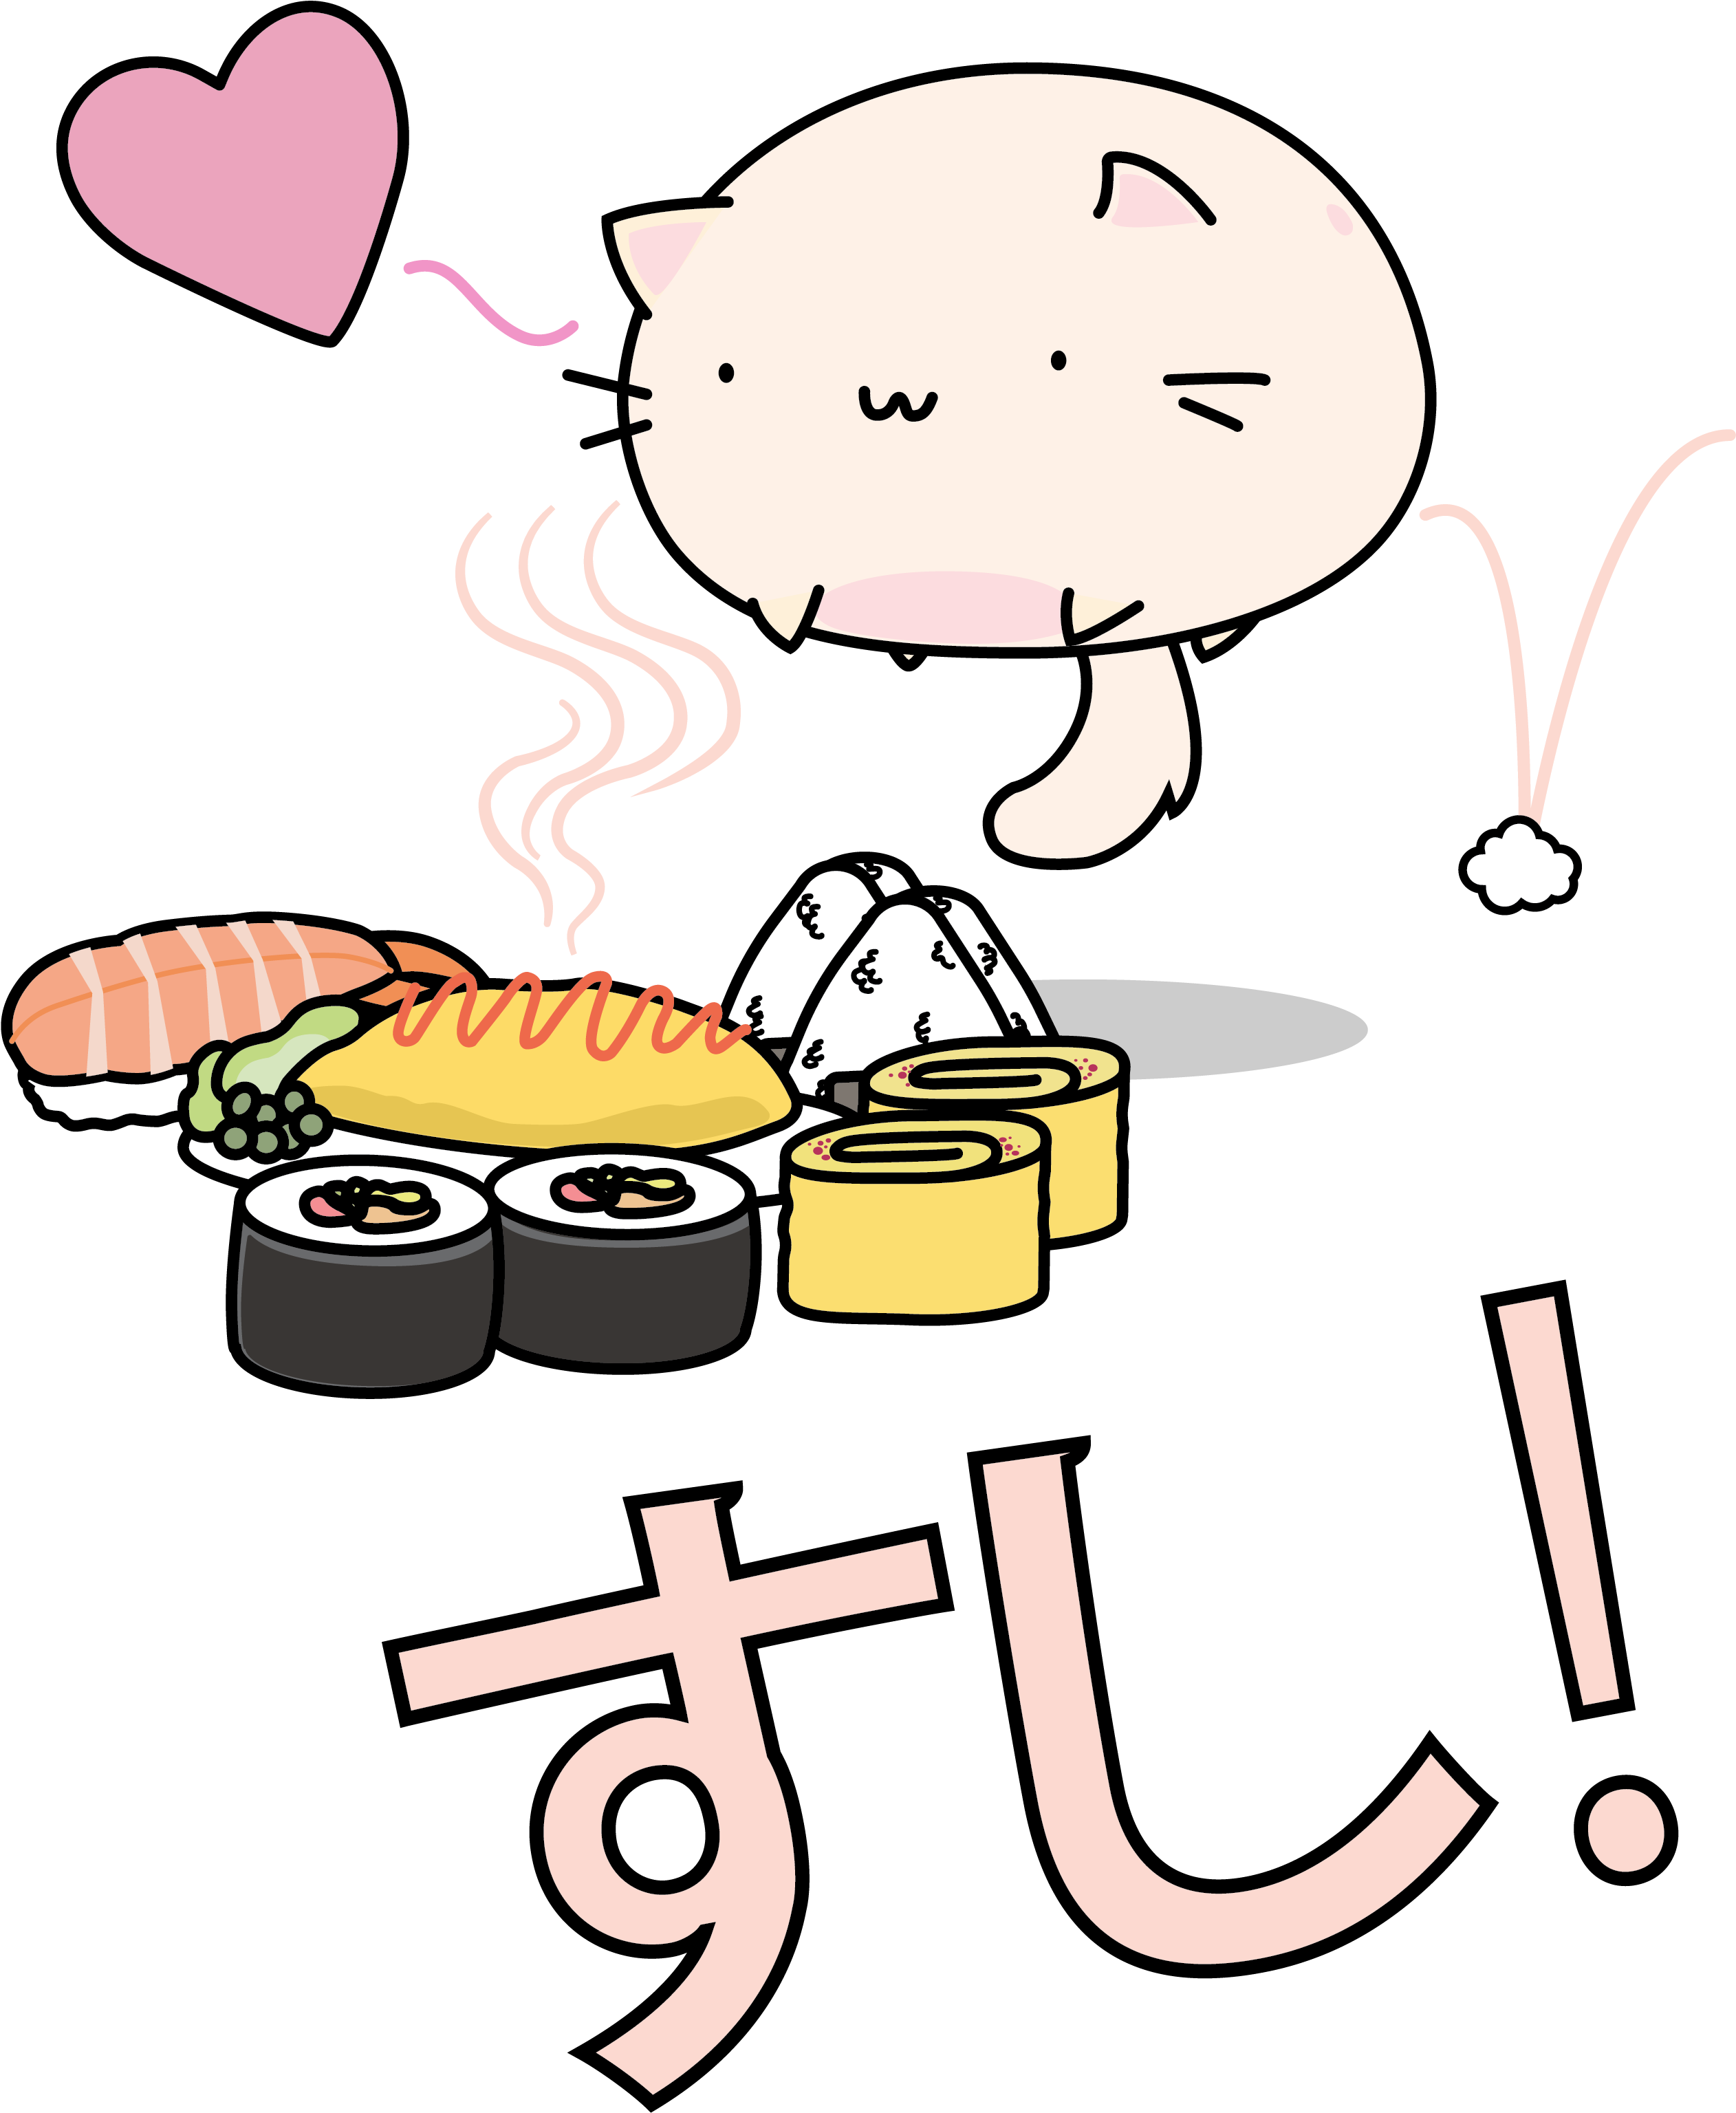 Sushi Cate Cute And Funny Illustration Sushi Food Japanese - Sushi Cate Cute And Funny Illustration Sushi Food Japanese (2550x3300)